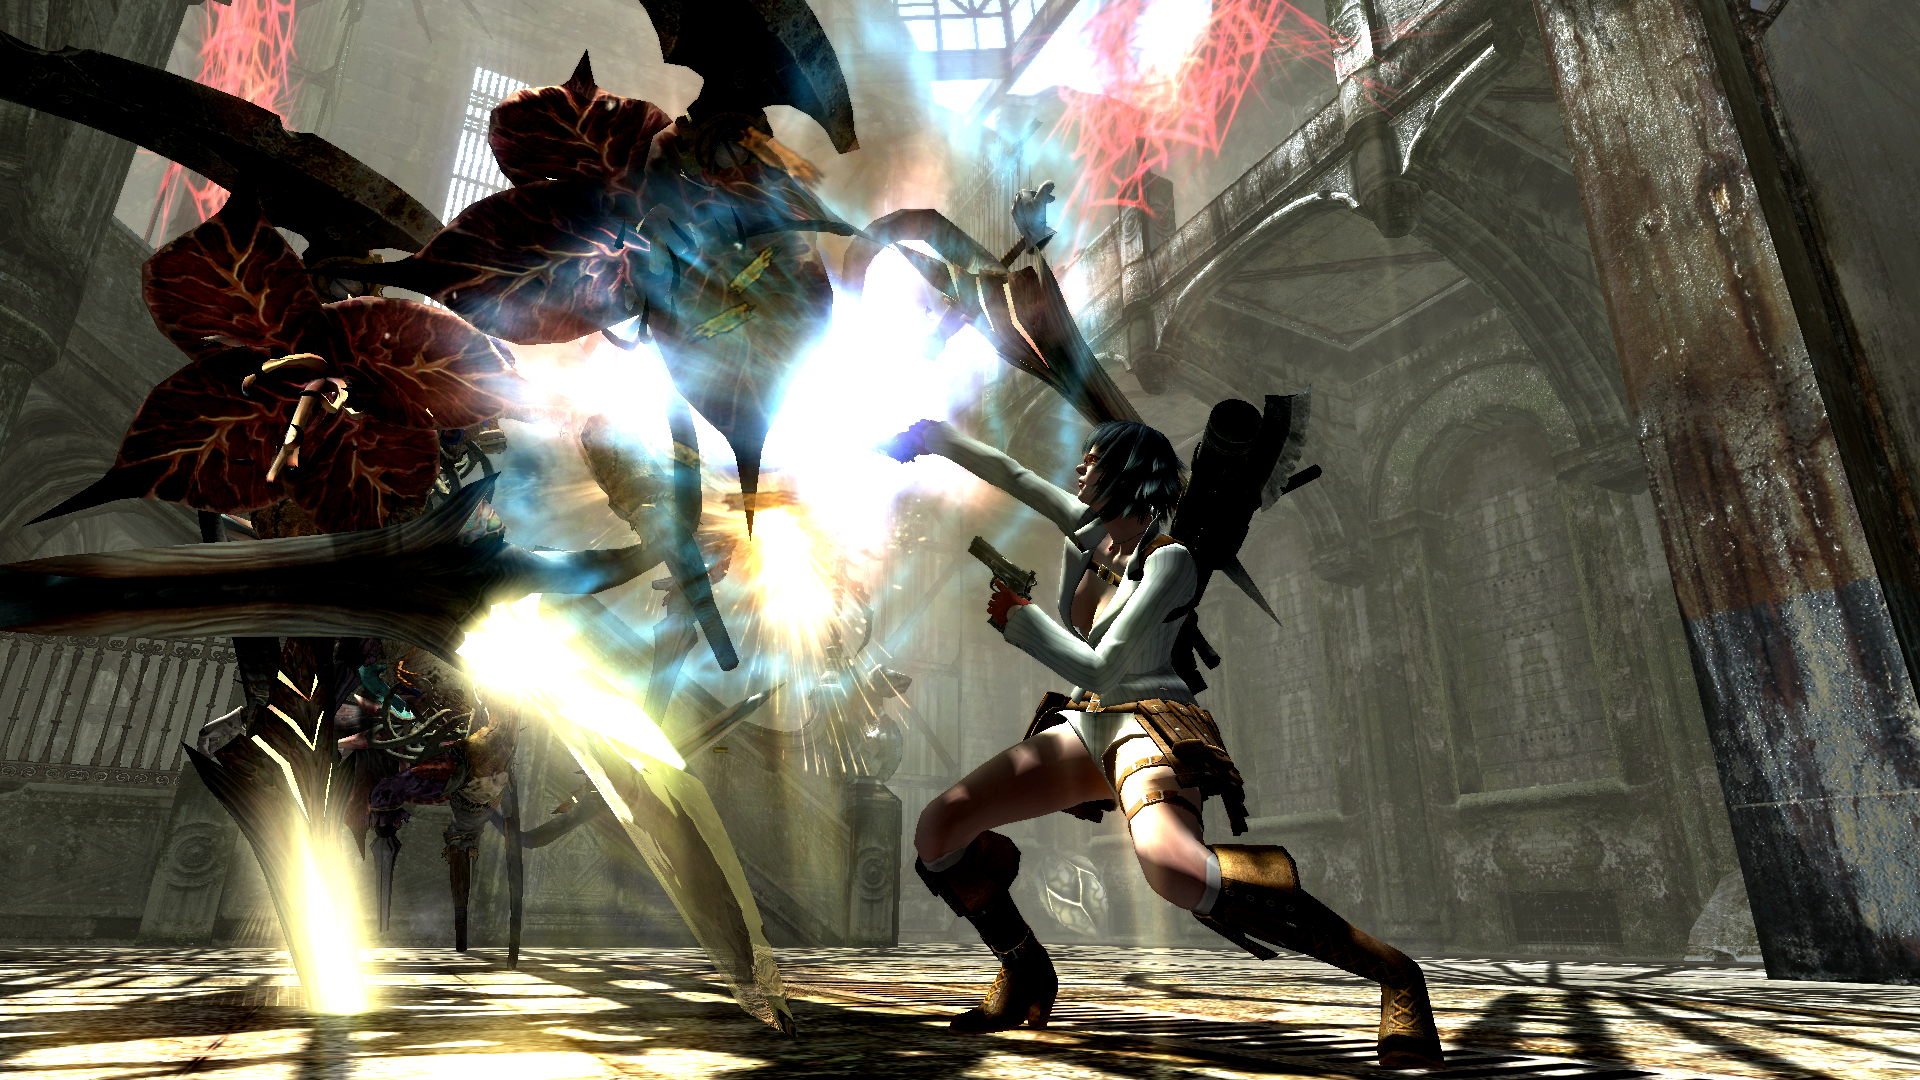 Devil May Cry 4 Special Edition available to download now